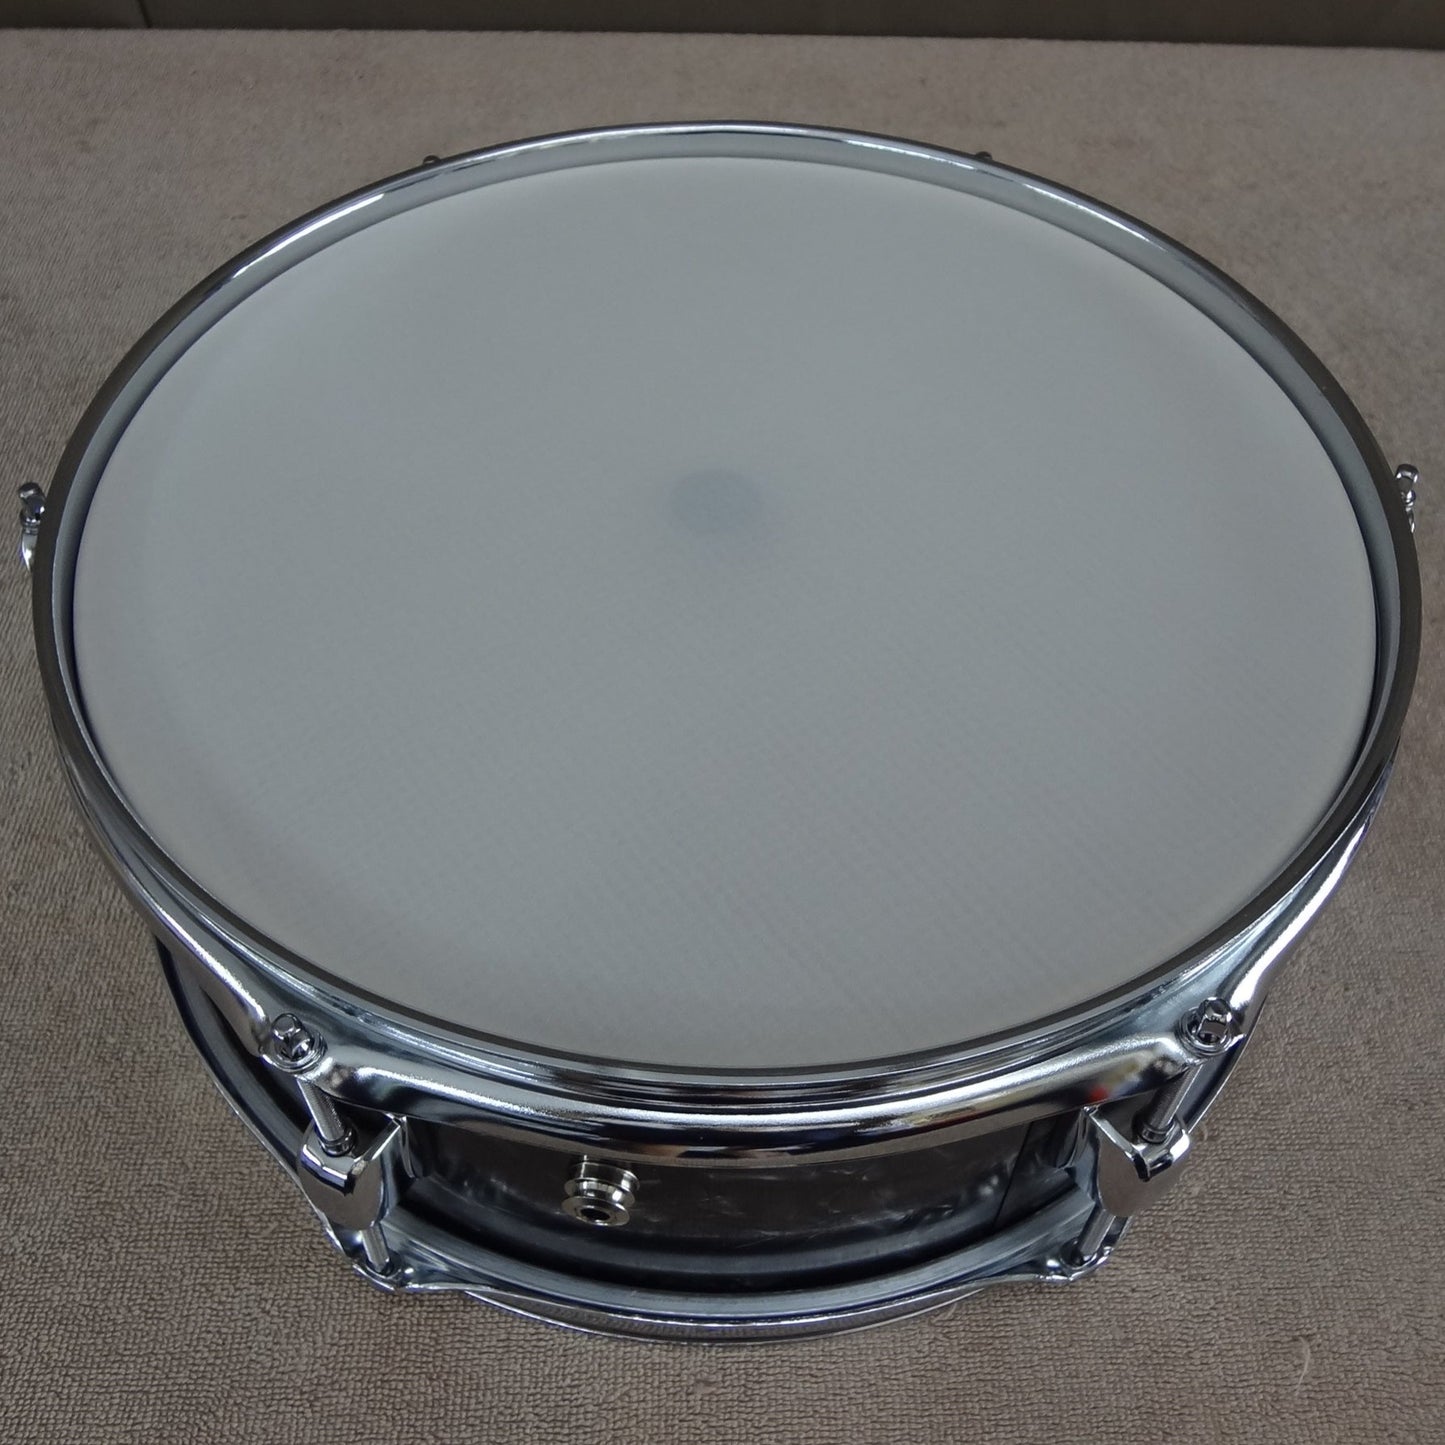 New 13 Inch Custom Electronic Snare Drum - Black Pearl